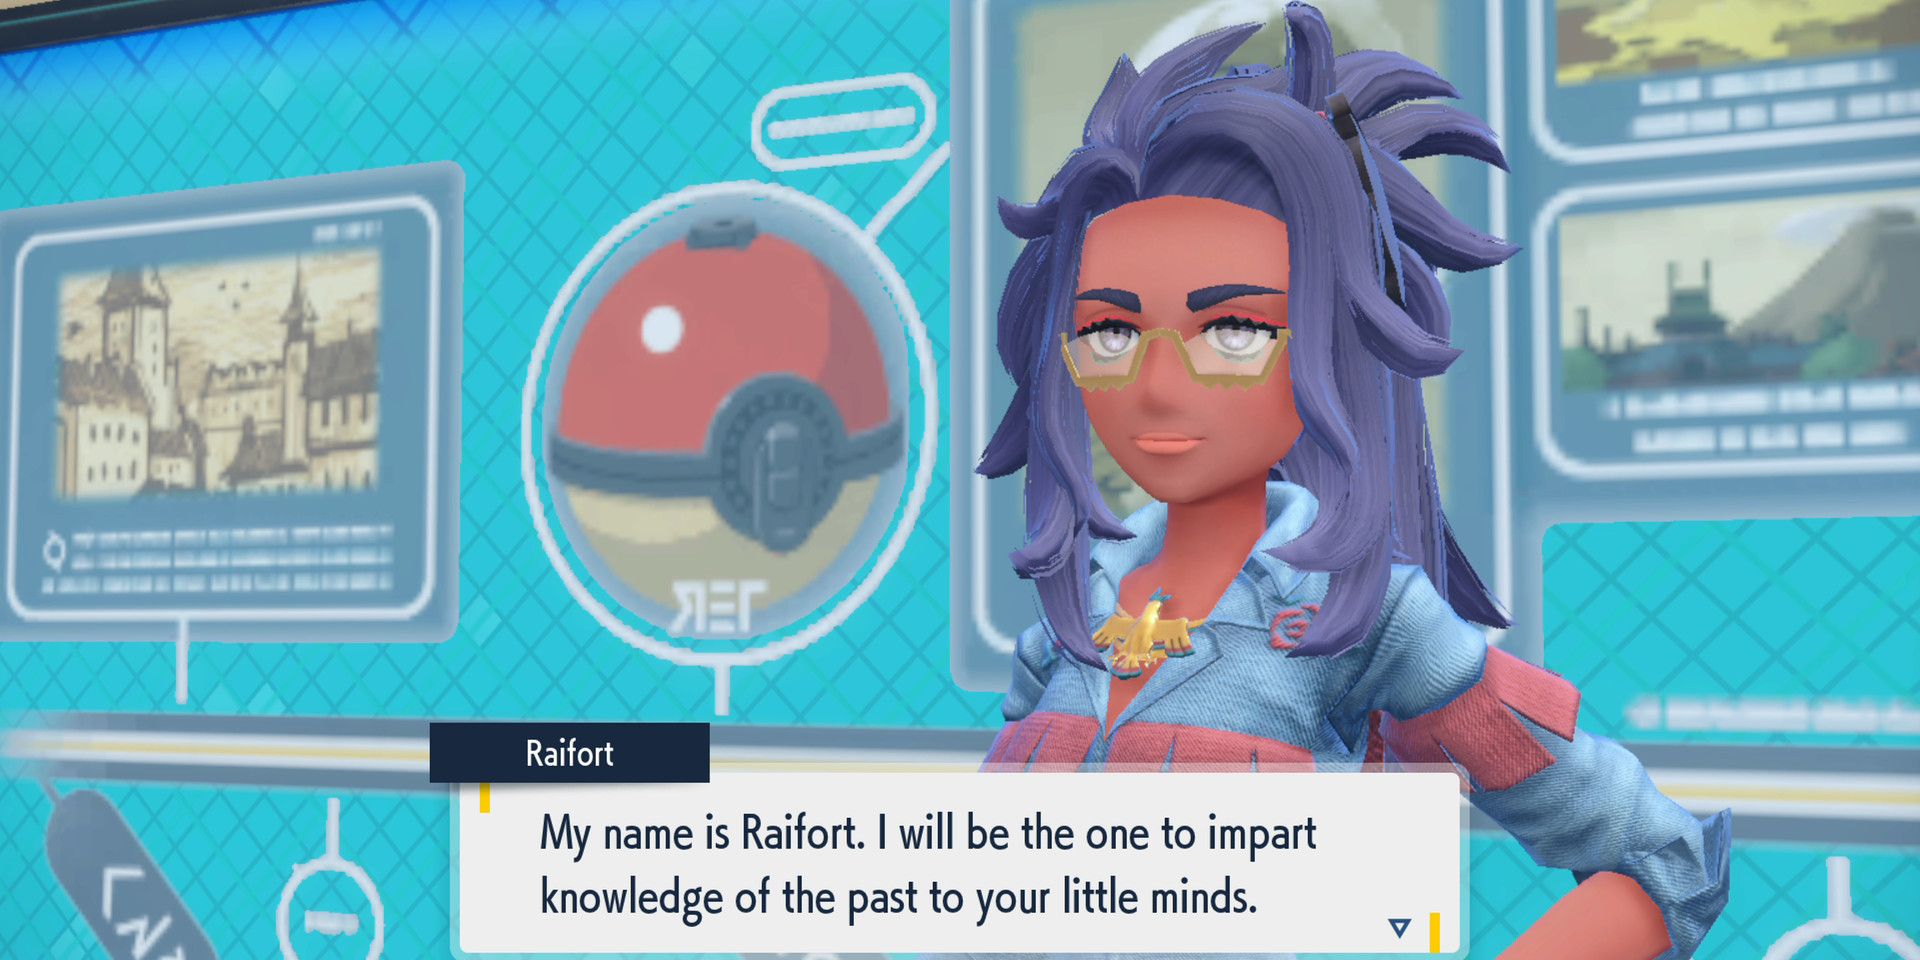 Pokémon Scarlet and Violet's Raifort, the history teacher at the academy. Raifort stands in front of a presentation showing a timeline, and her dialogue box reads, "My name is Raifort. I will be the one to impart knowledge of the past to your little minds."